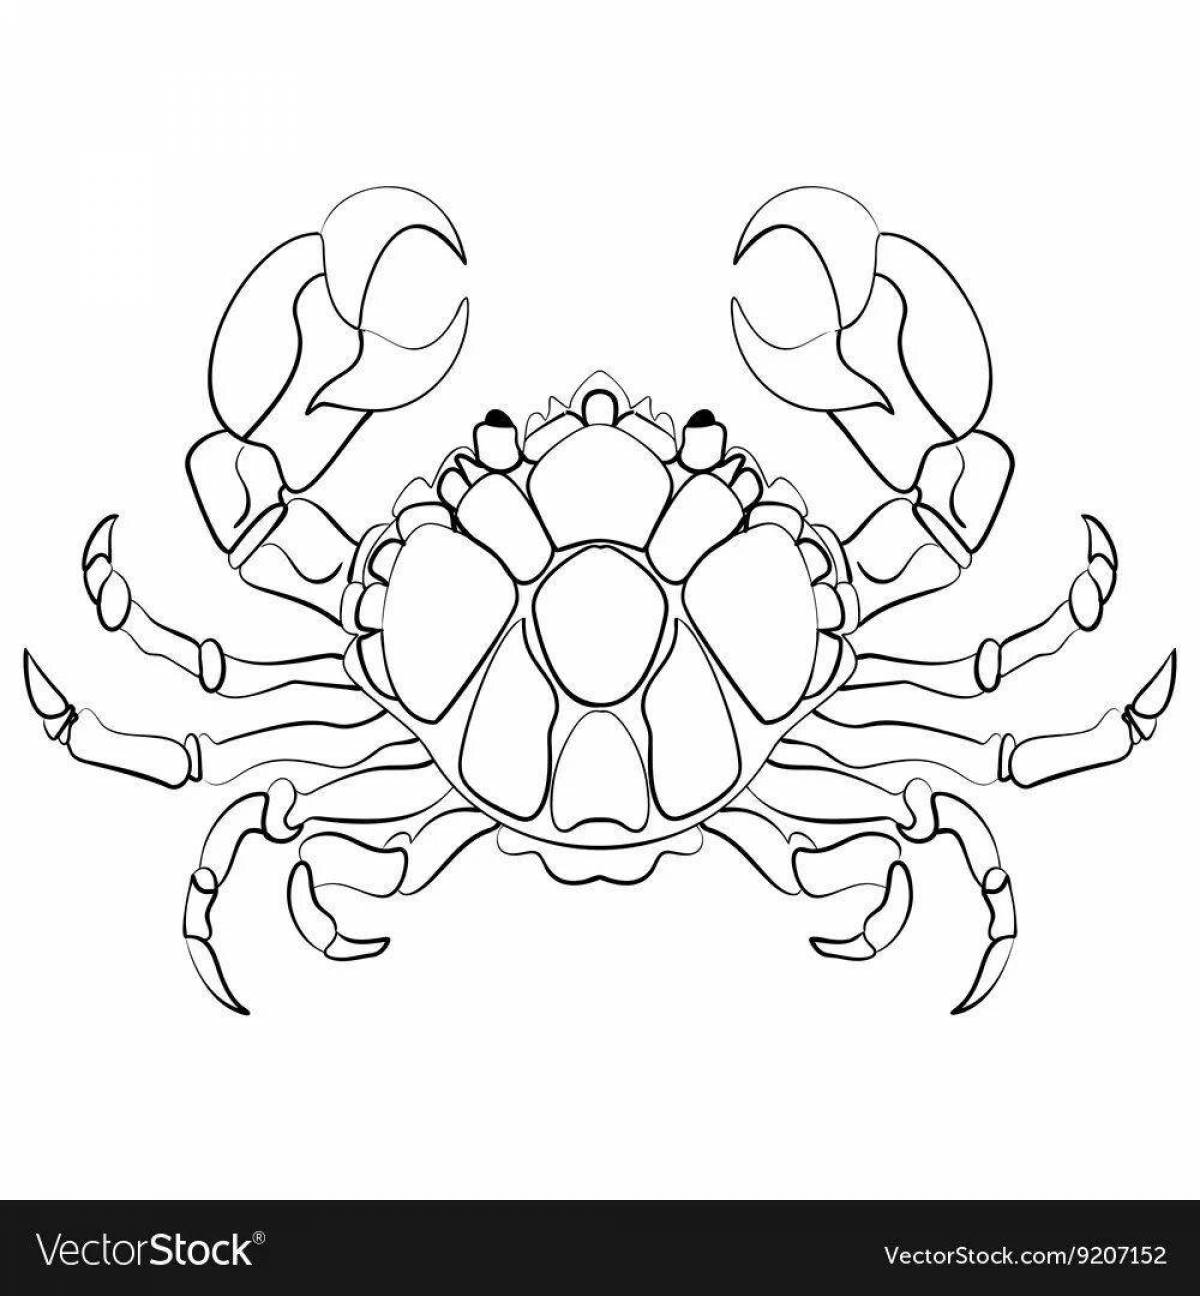 Adorable cancer coloring page